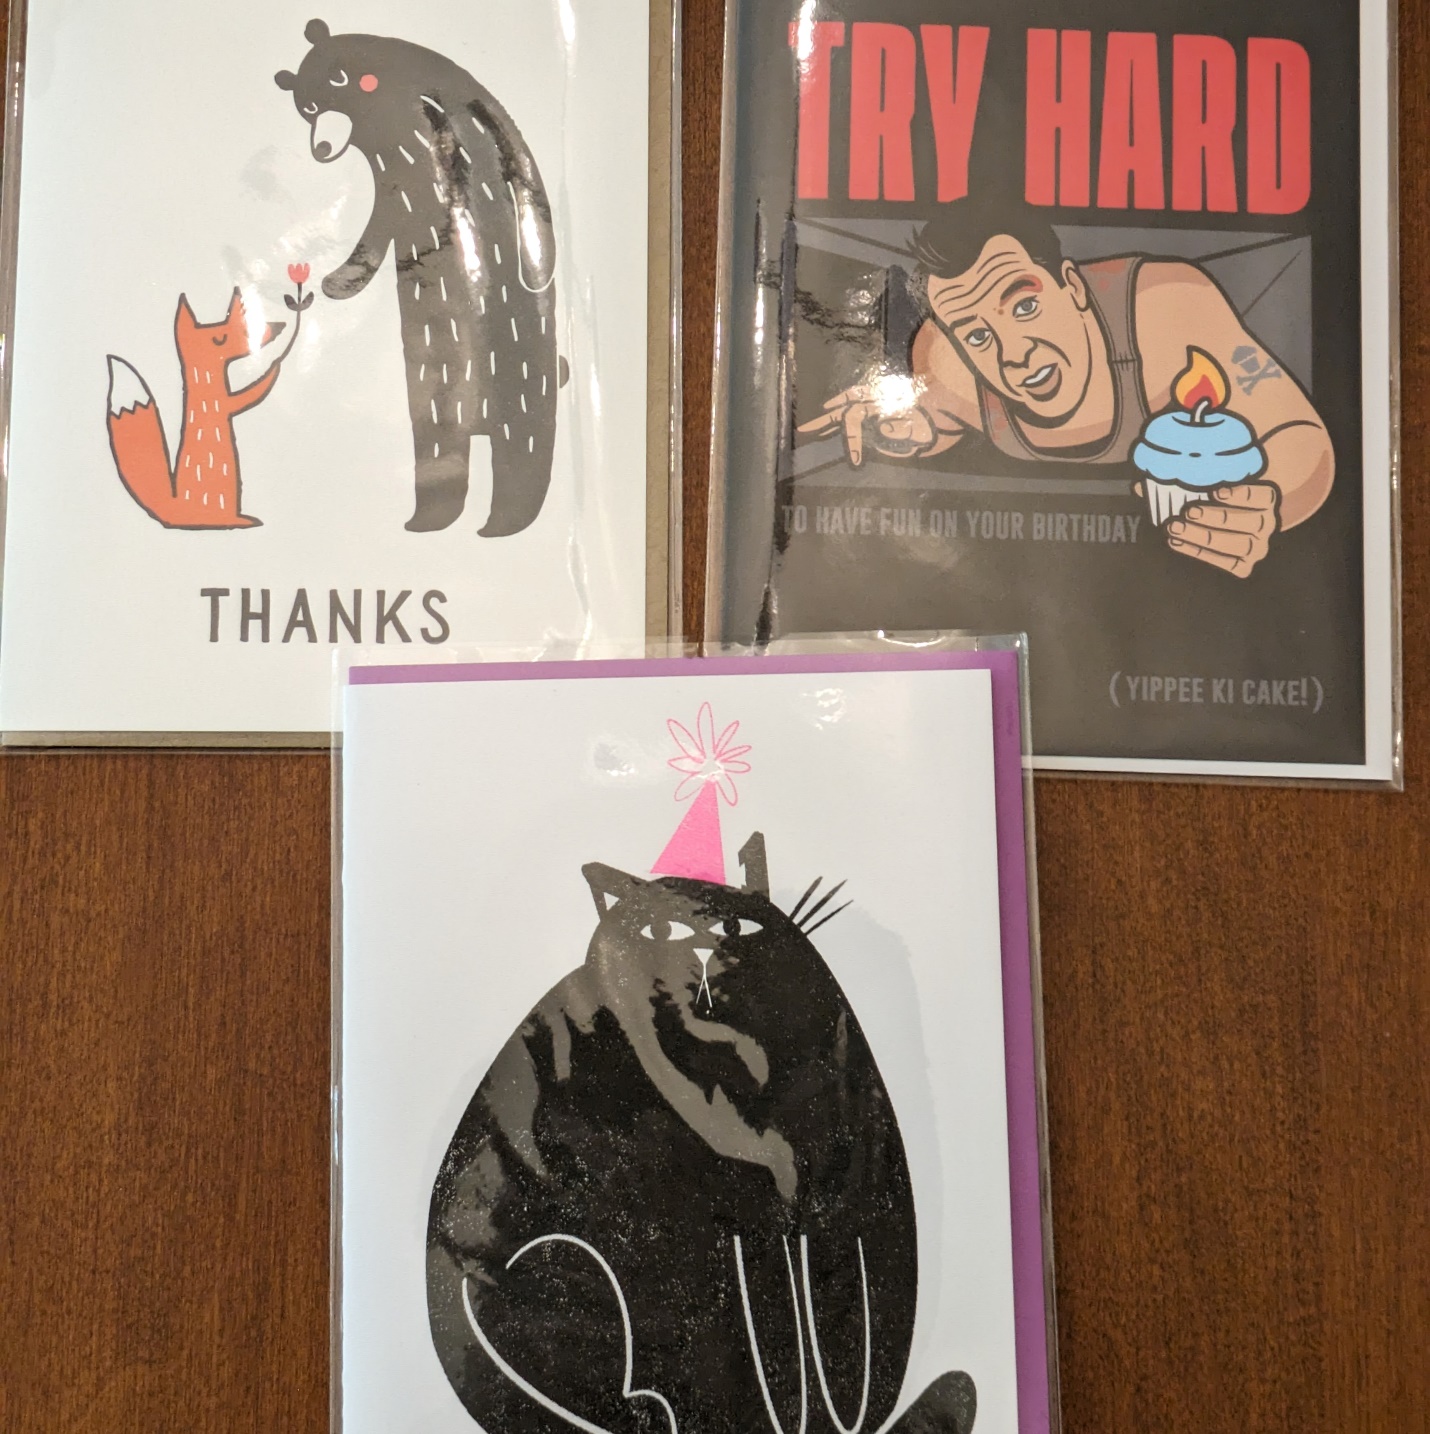 Calliope also has a great card selection from makers all over. These are the three I took home Saturday. In total, I reckon this is the 4th or 5th card with a chonky cat I've bought there.